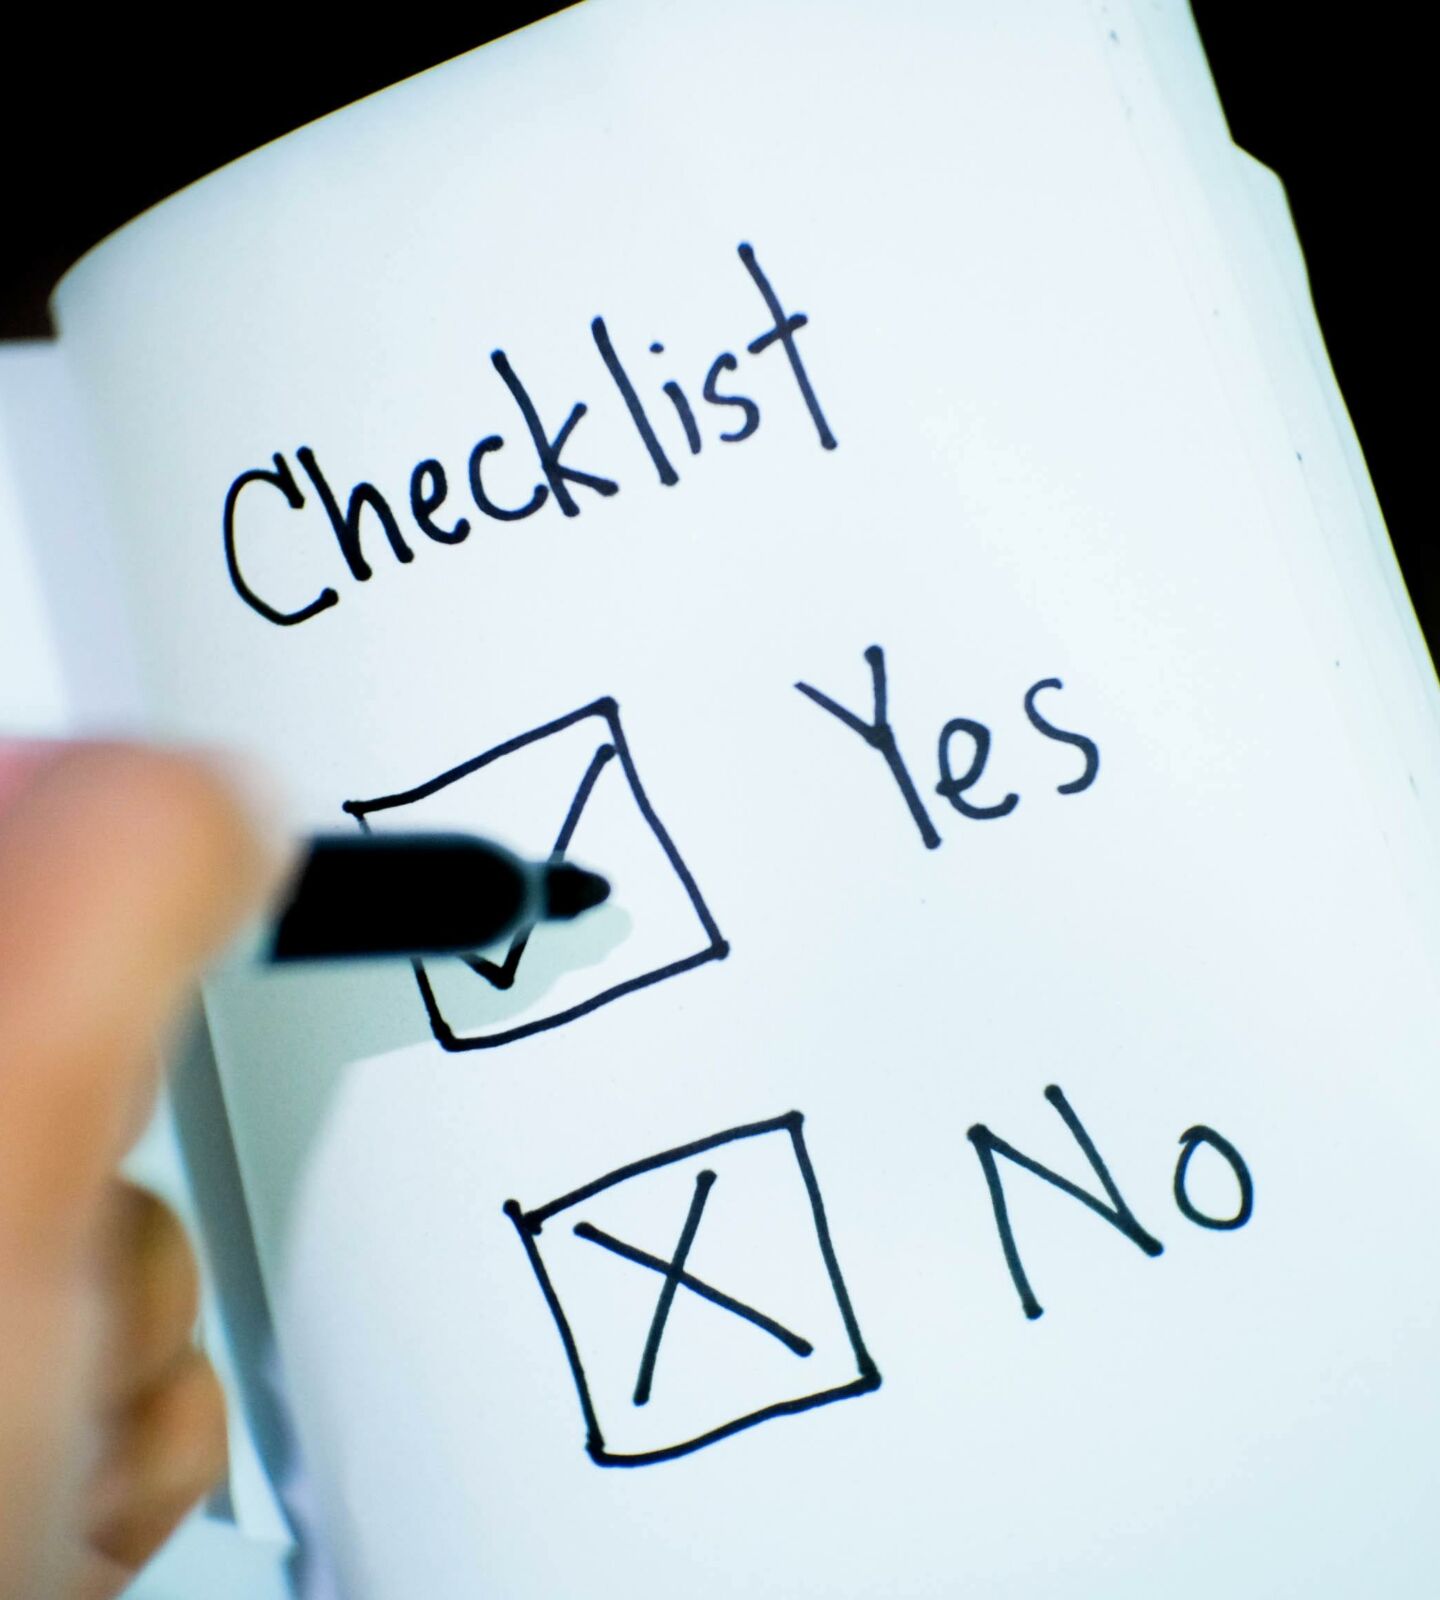 Handwritten checklist with yes and no checkboxes